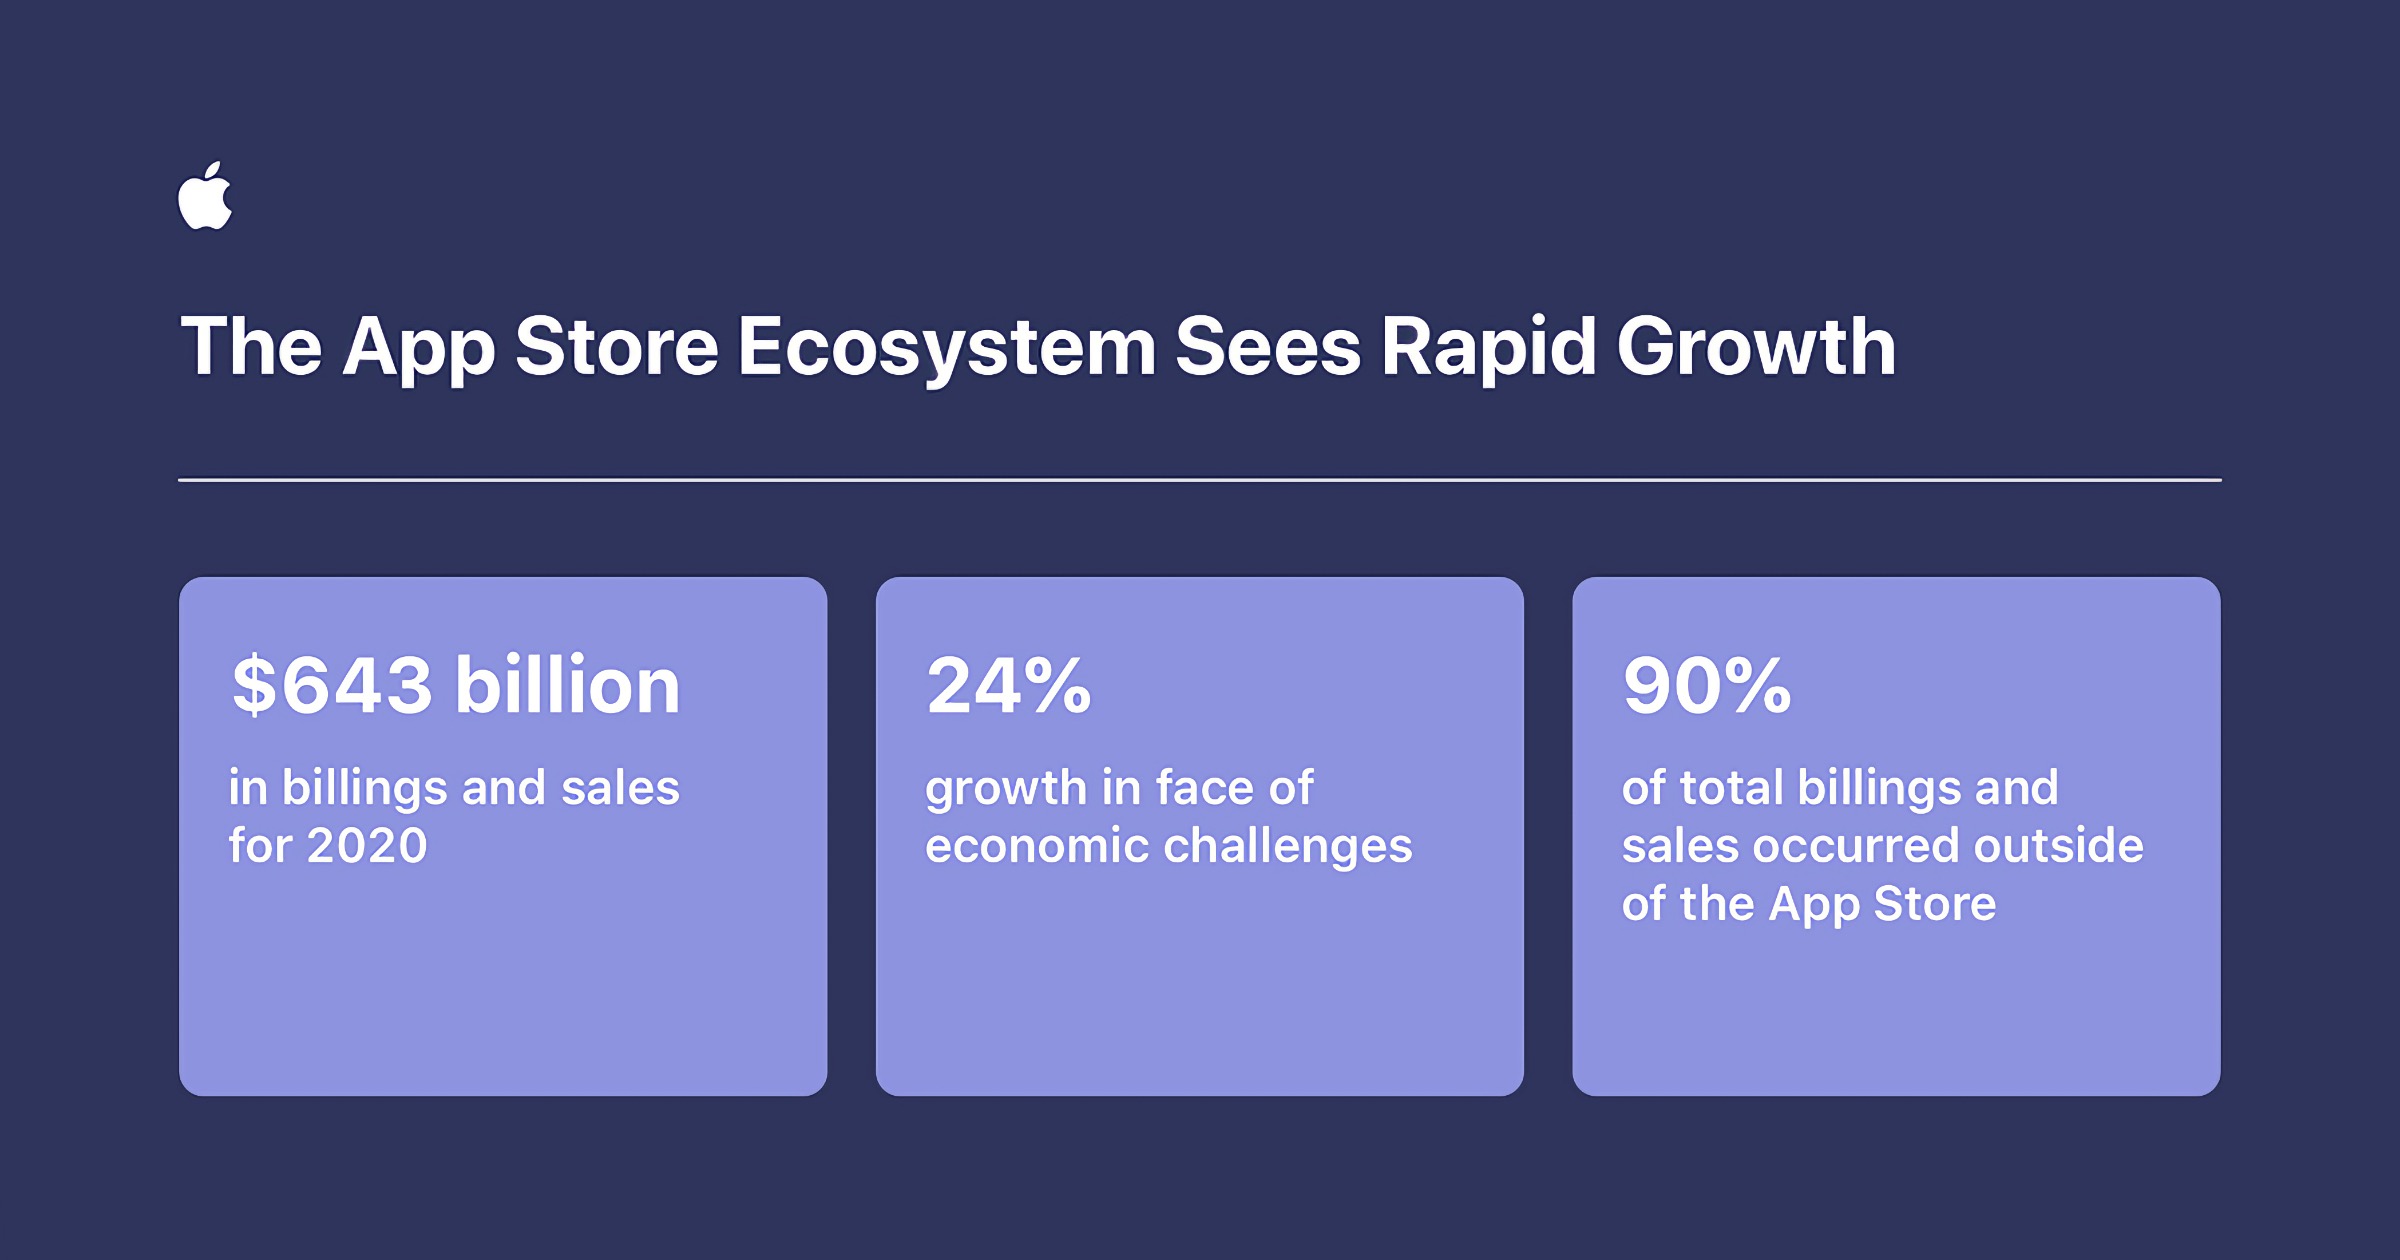 App Store ecosystem growth in 2020